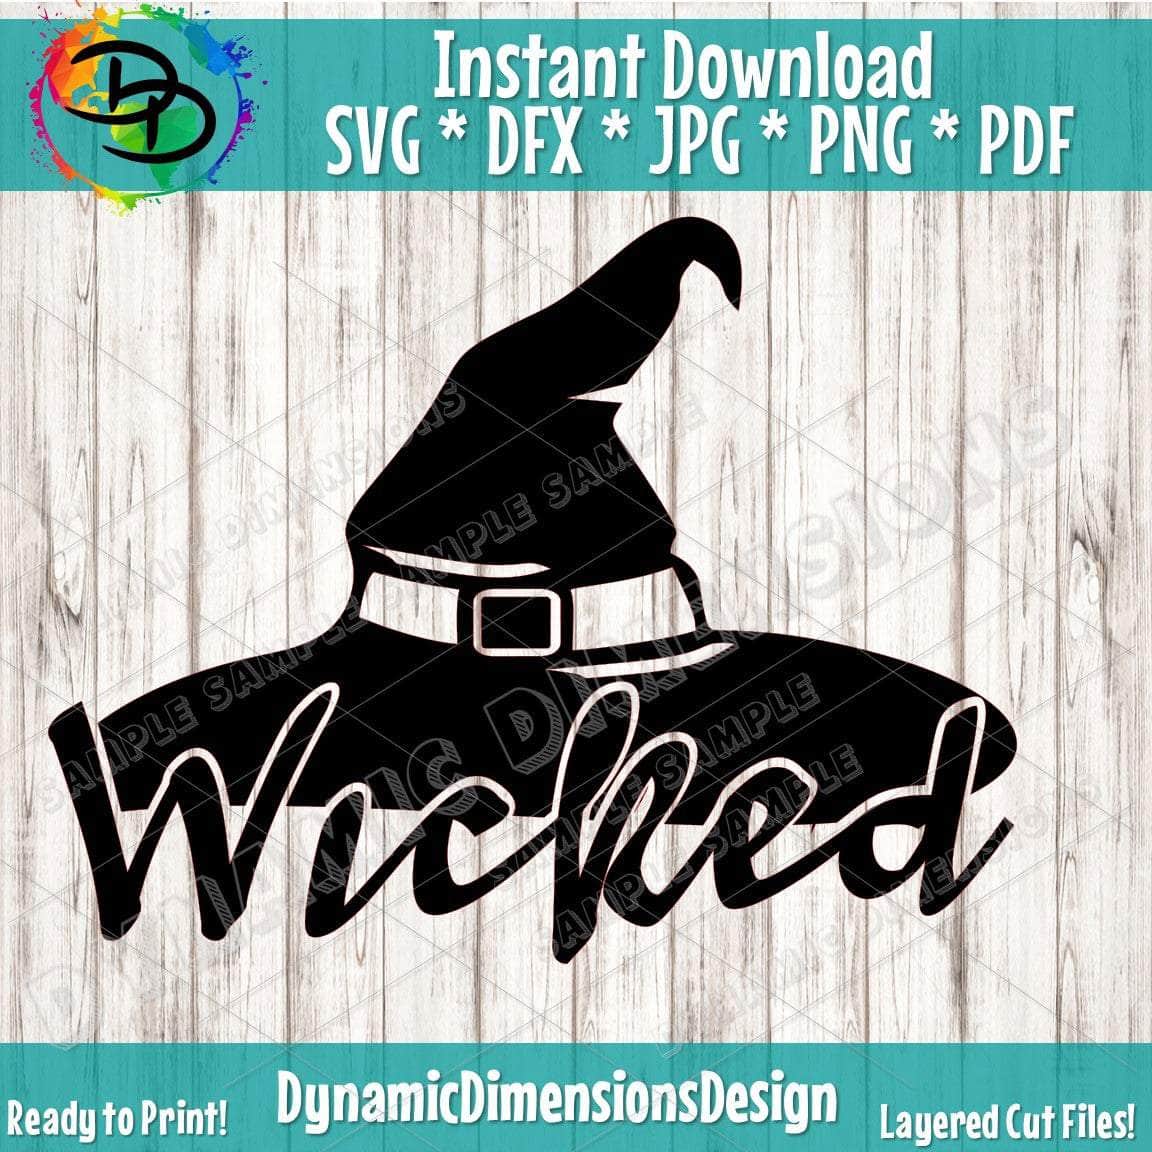 Pefectly wicked SVG/PNG